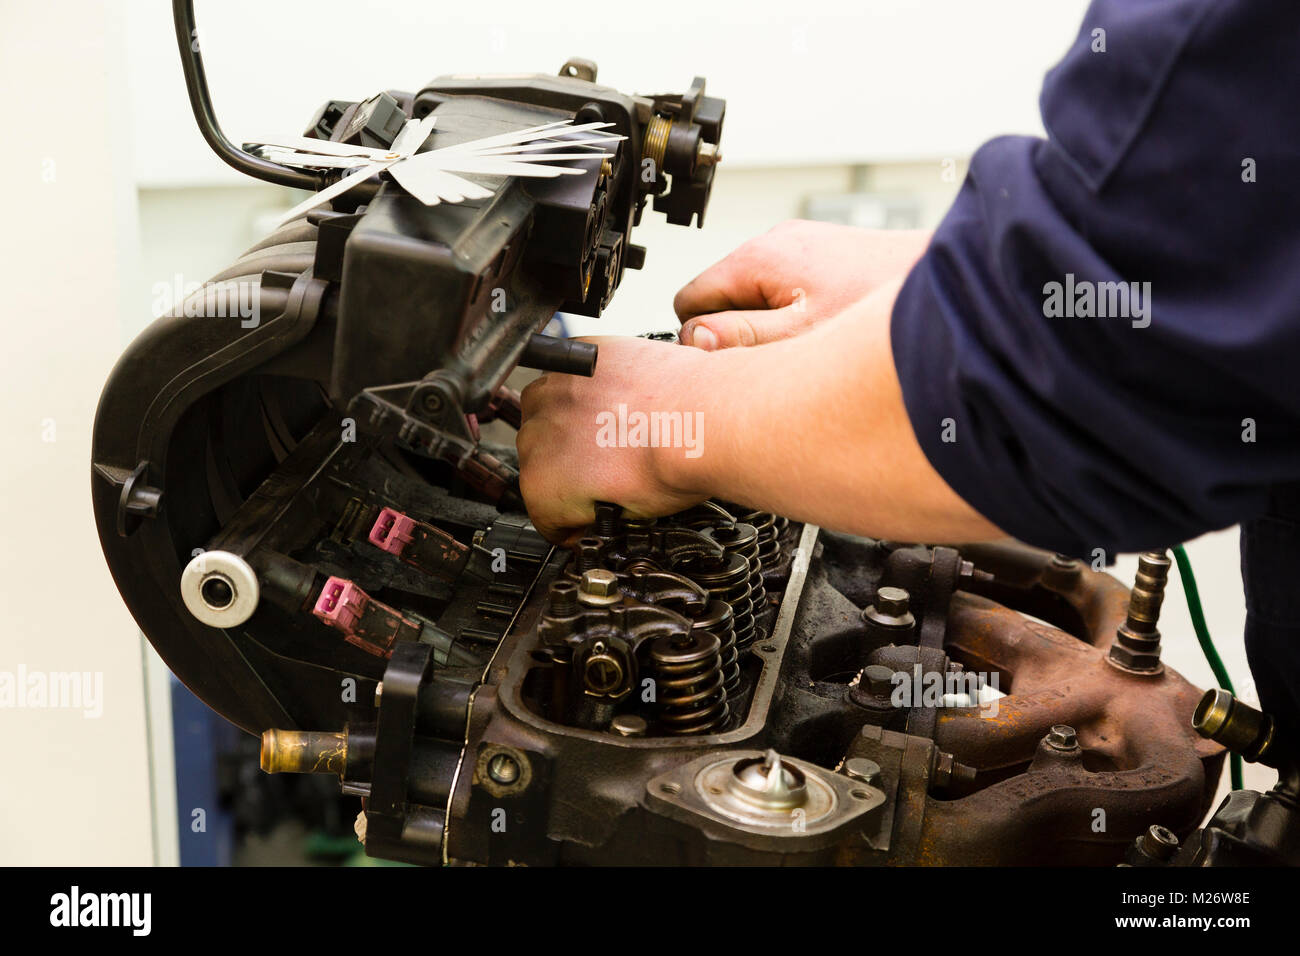 A young male apprentice works on a car engine while training to be a mechanic. Stock Photo